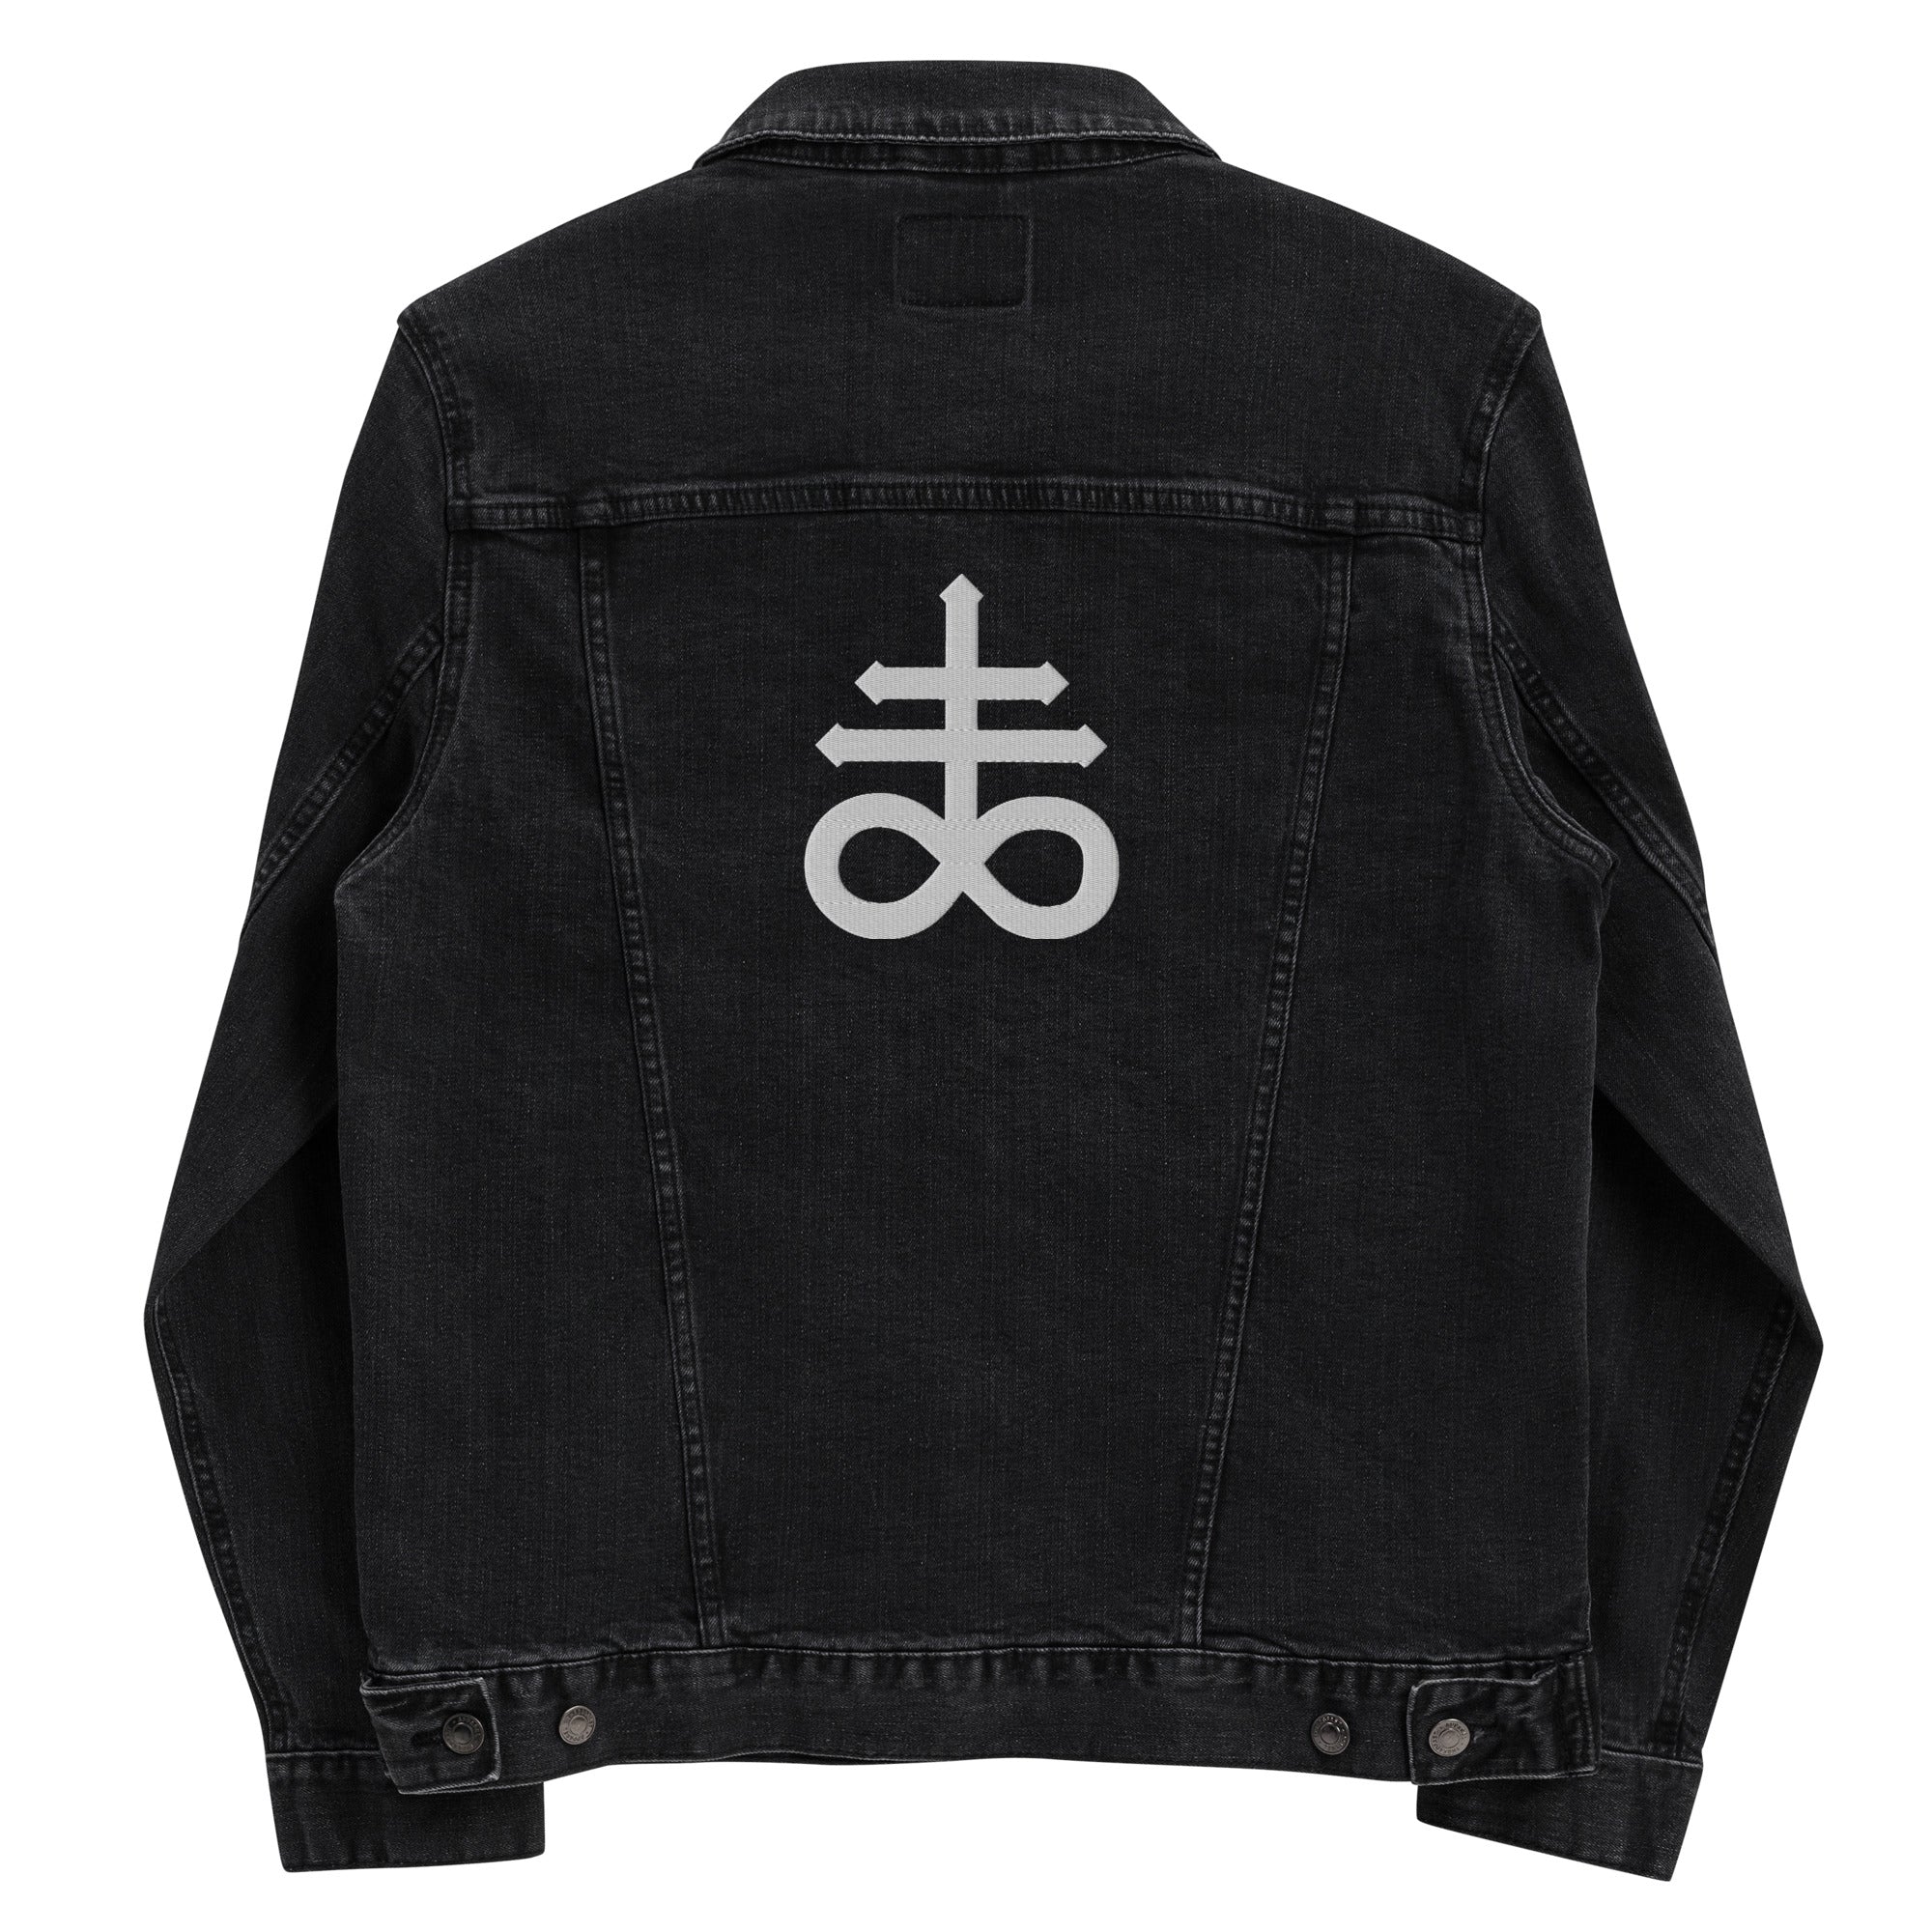 The Leviathan Cross of Satan Occult Symbol Embroidered Denim Jacket - Front and Back - Edge of Life Designs